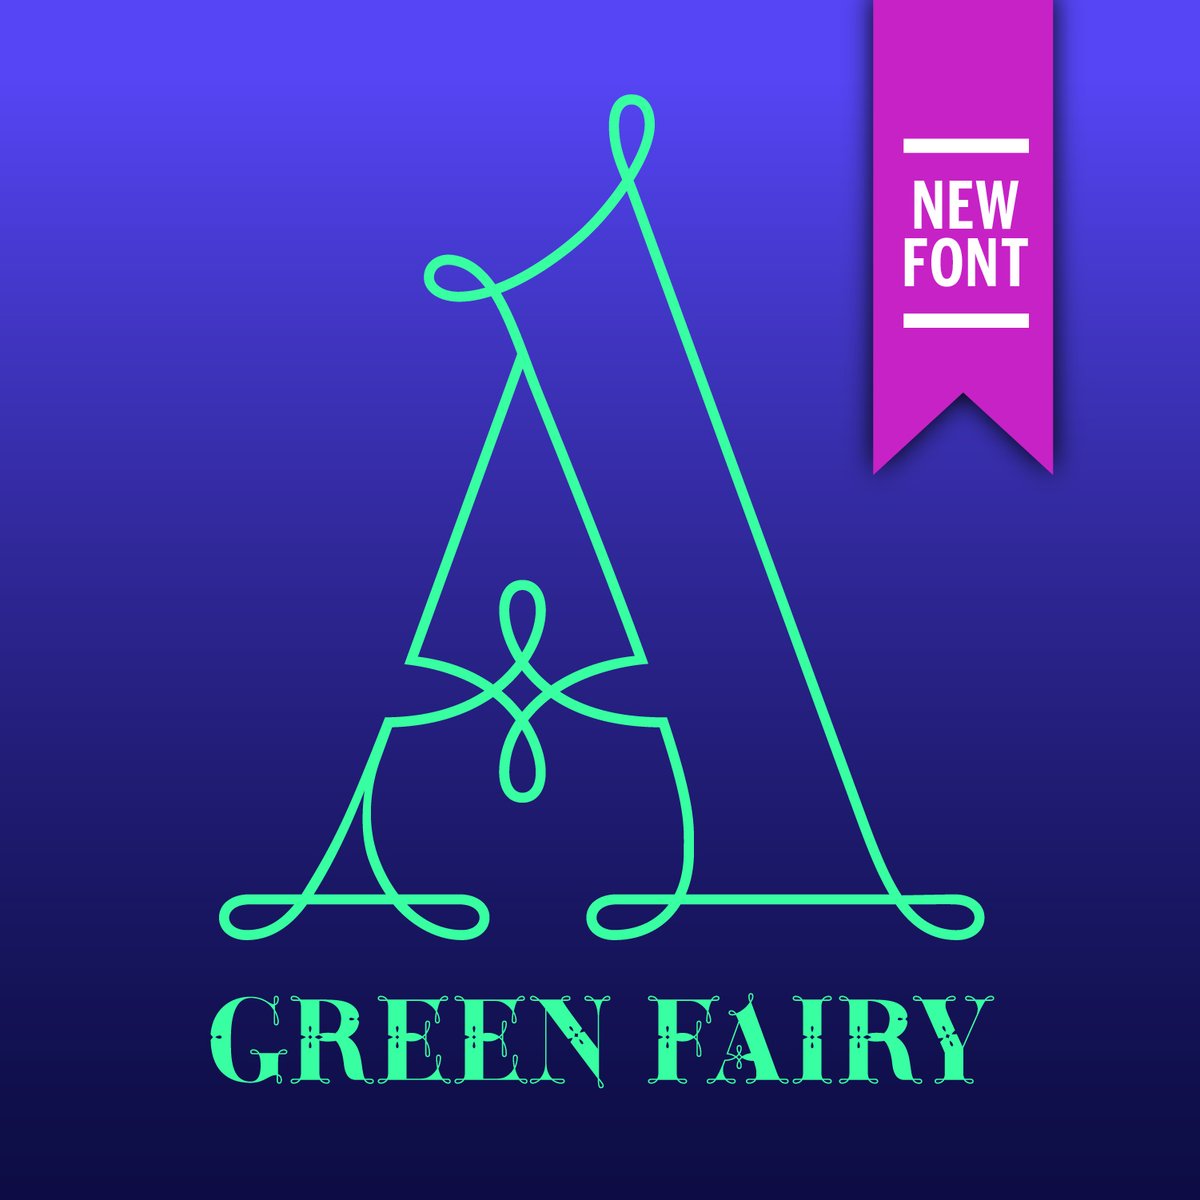 Image of Green Fairy